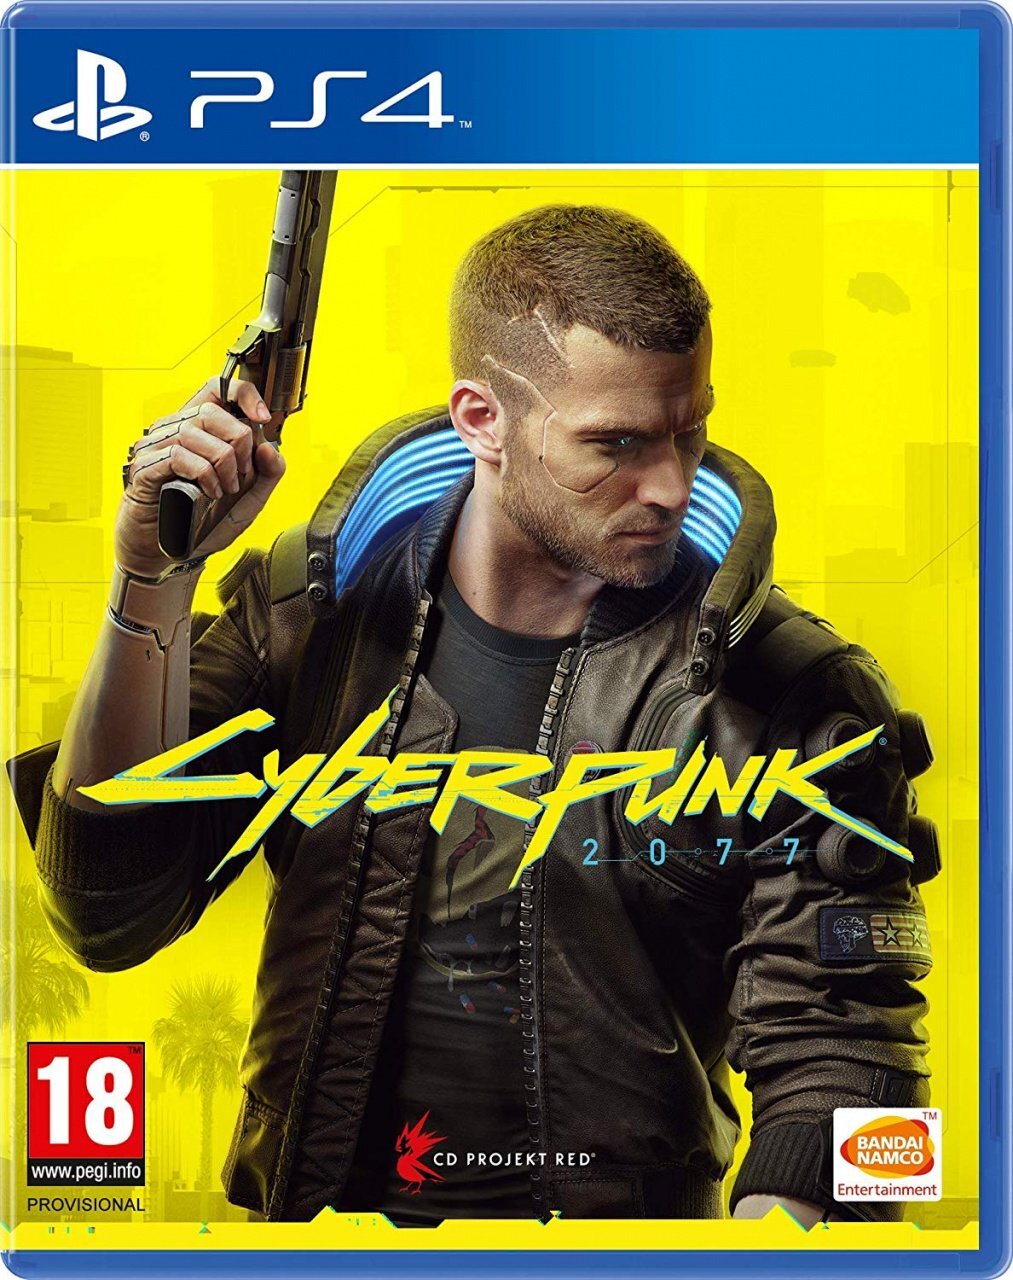 cyberpunk-2077s-cover-featuring-male-v.large.jpg